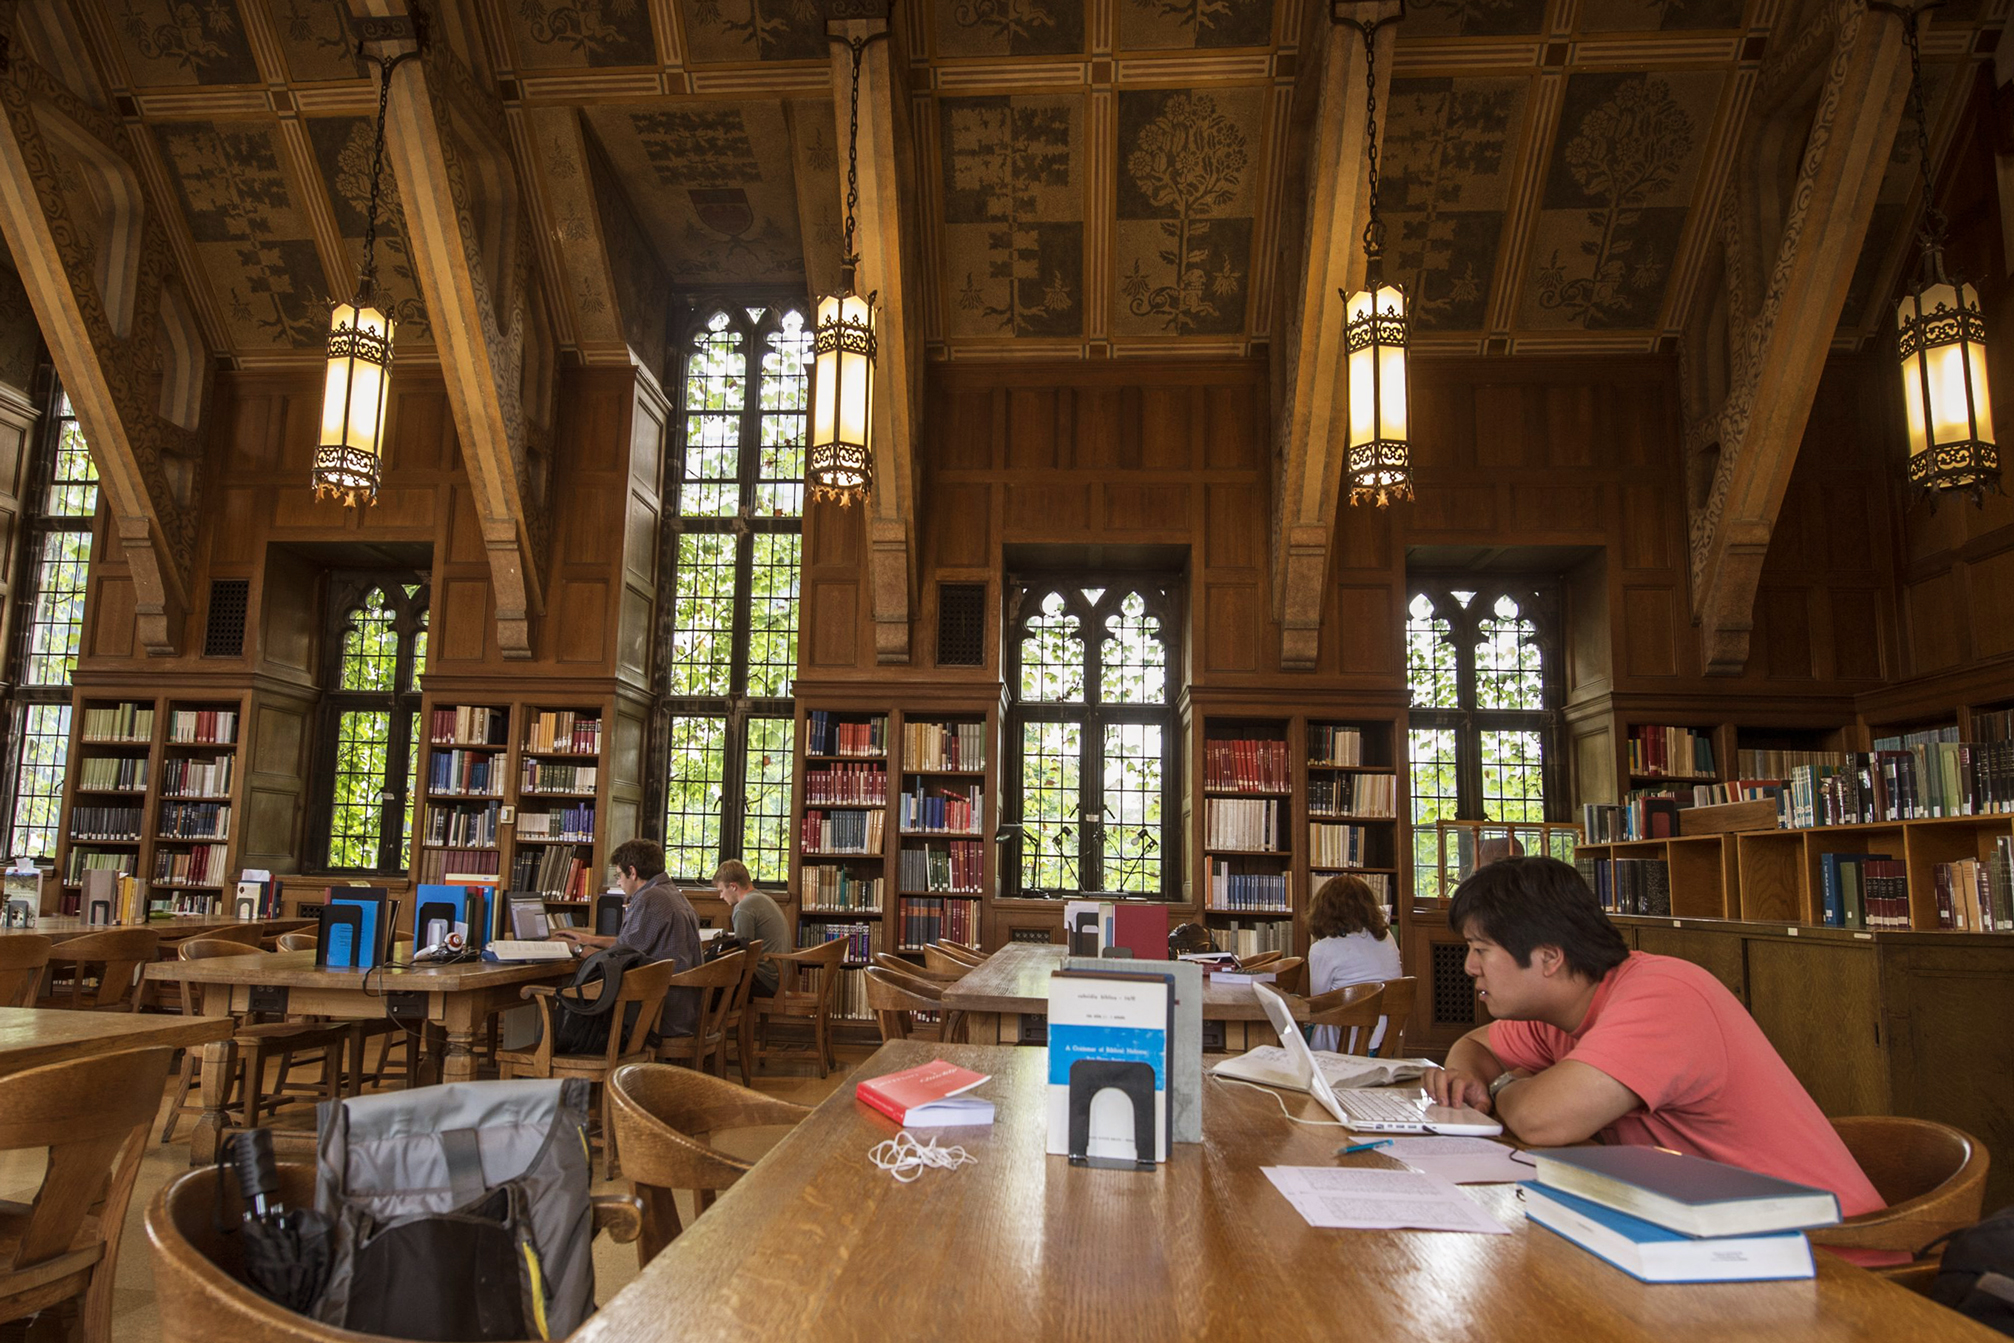 Student studying at the University of Chicago library